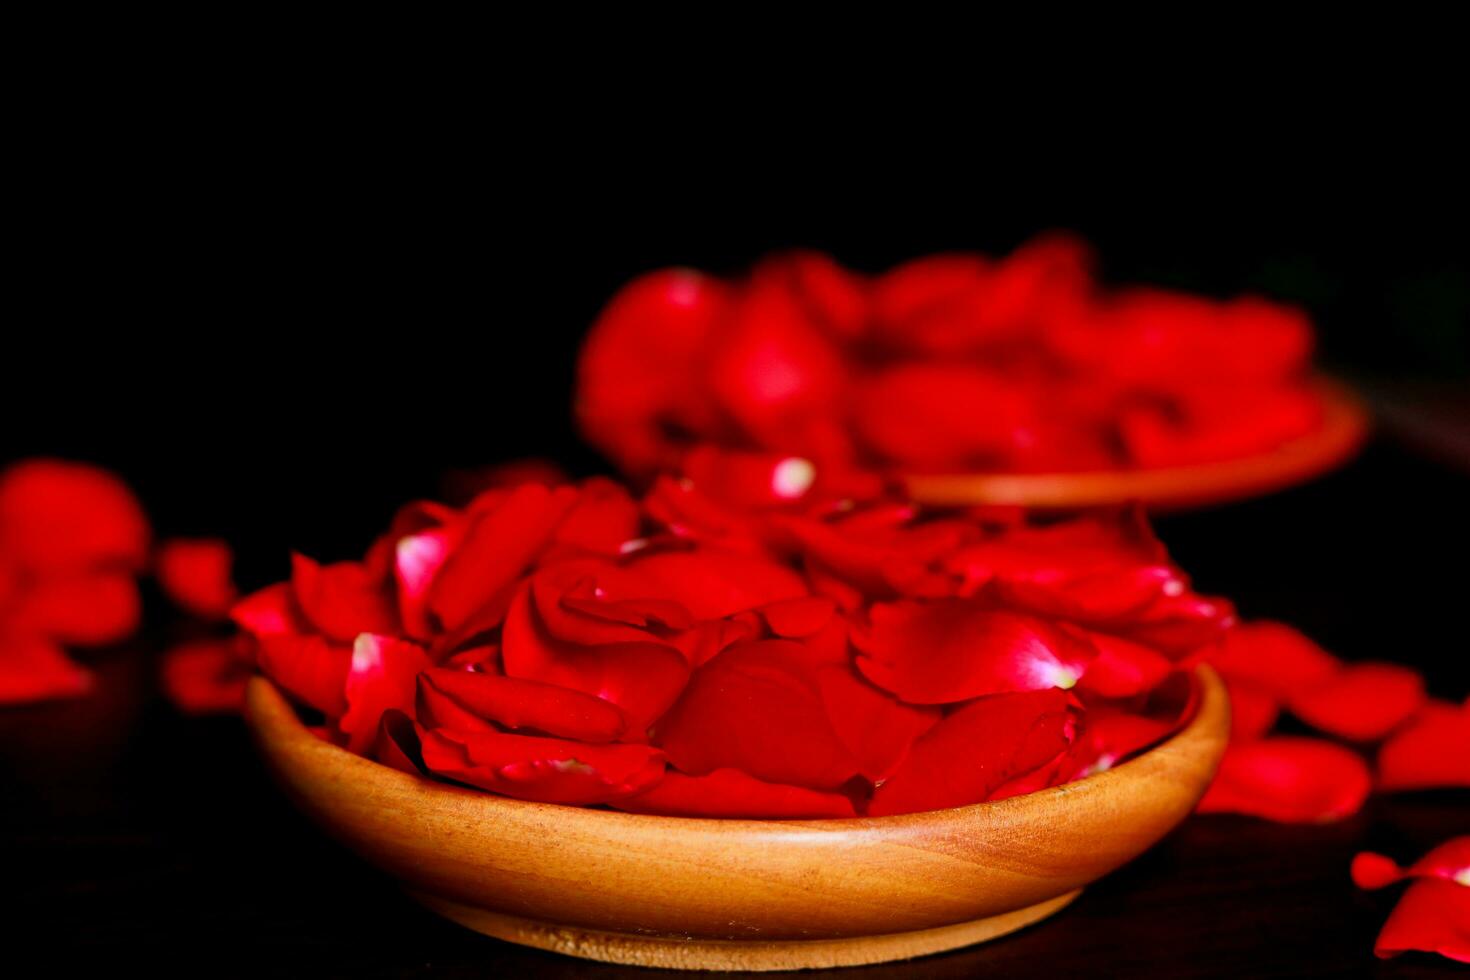 Rose petals in a bowl on a table with a black background photo